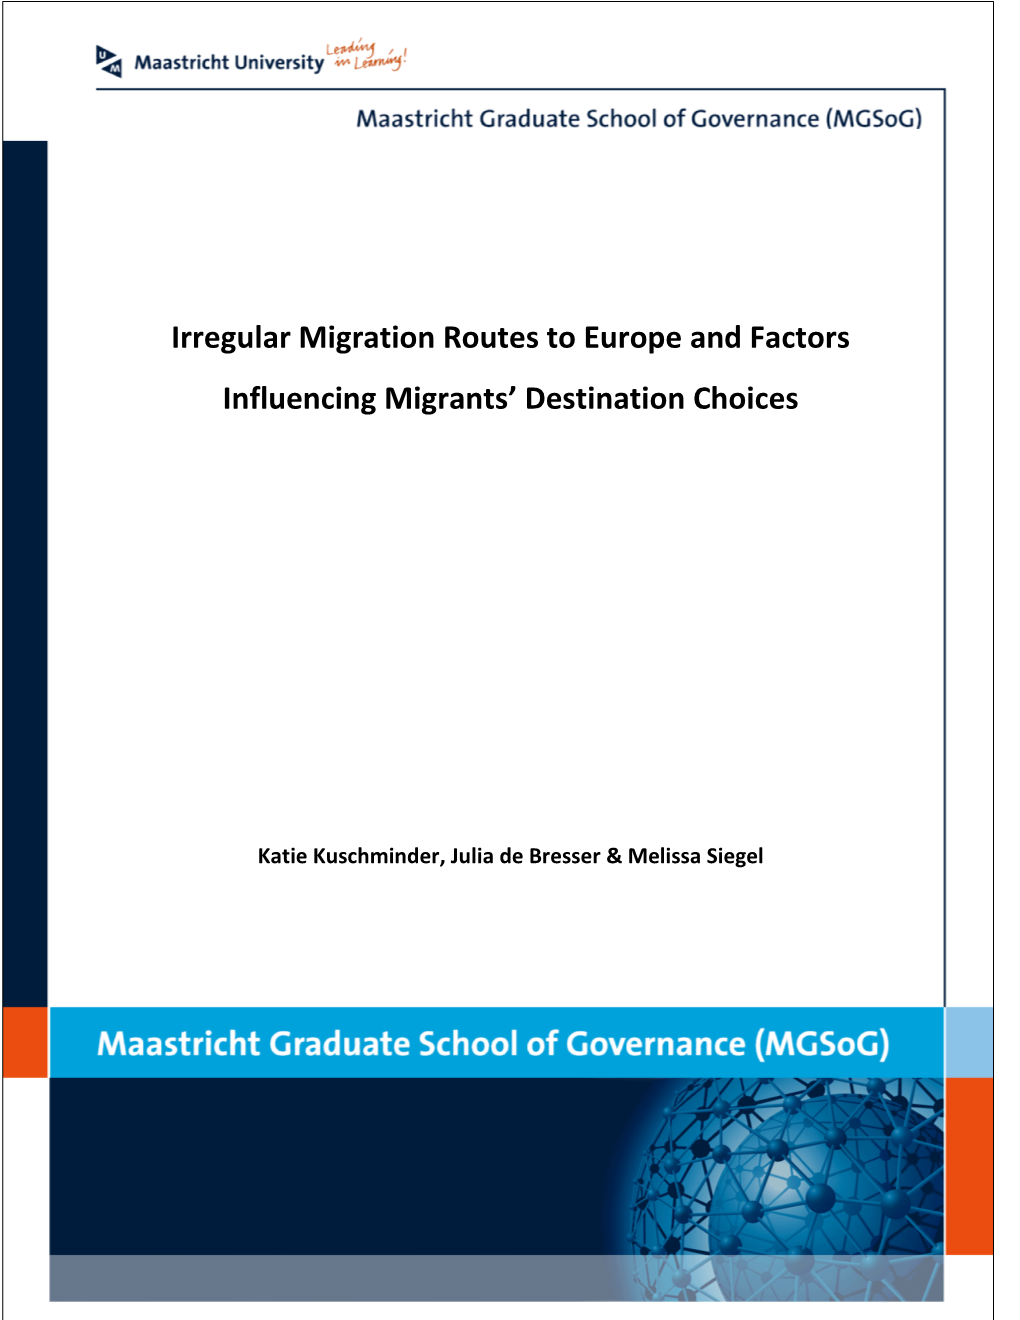 Irregular Migration Routes to Europe and Factors Influencing Migrants’ Destination Choices